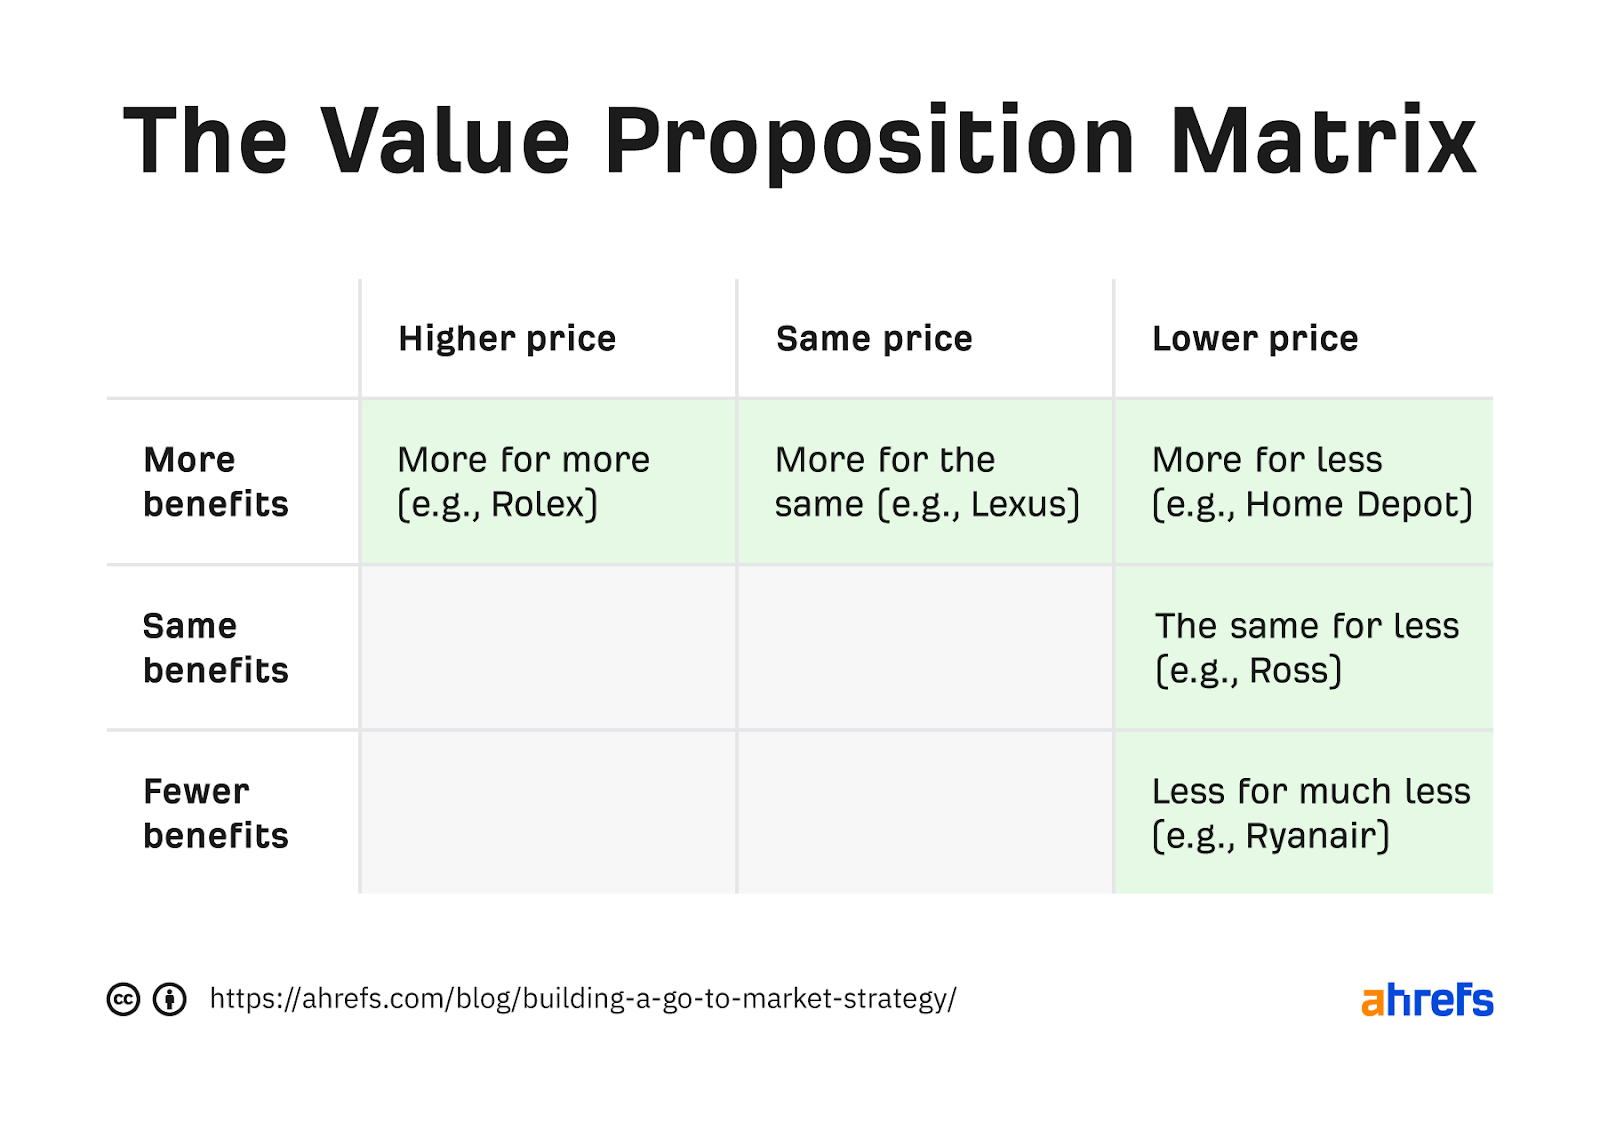 Value proposition matrix table. Three columns are "higher price," "same price," and "lower price." Rows are "more benefits," "same benefits," and "fewer benefits"